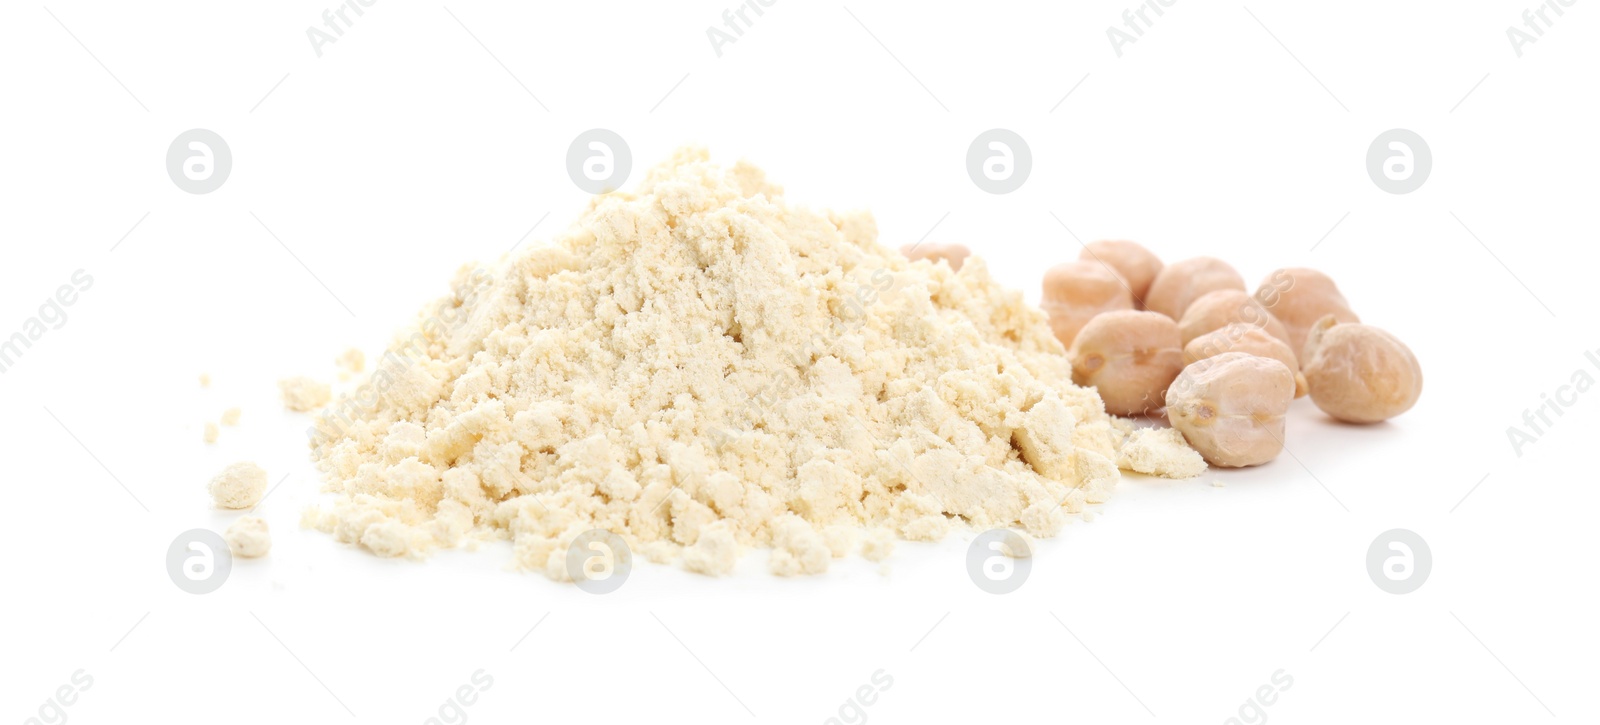 Photo of Pile of chickpea flour and seeds isolated on white